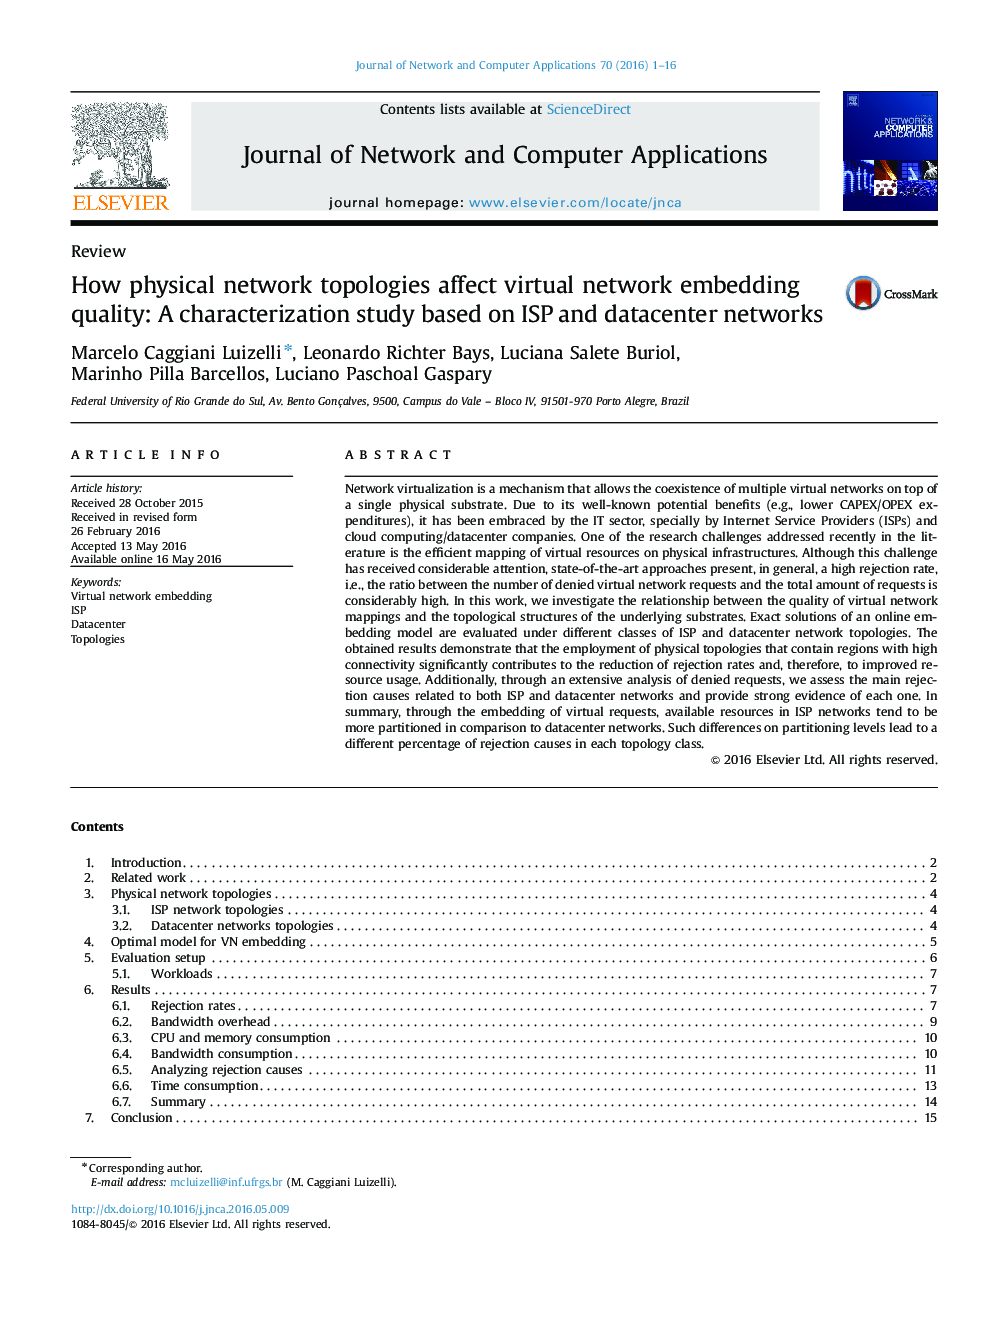 How physical network topologies affect virtual network embedding quality: A characterization study based on ISP and datacenter networks